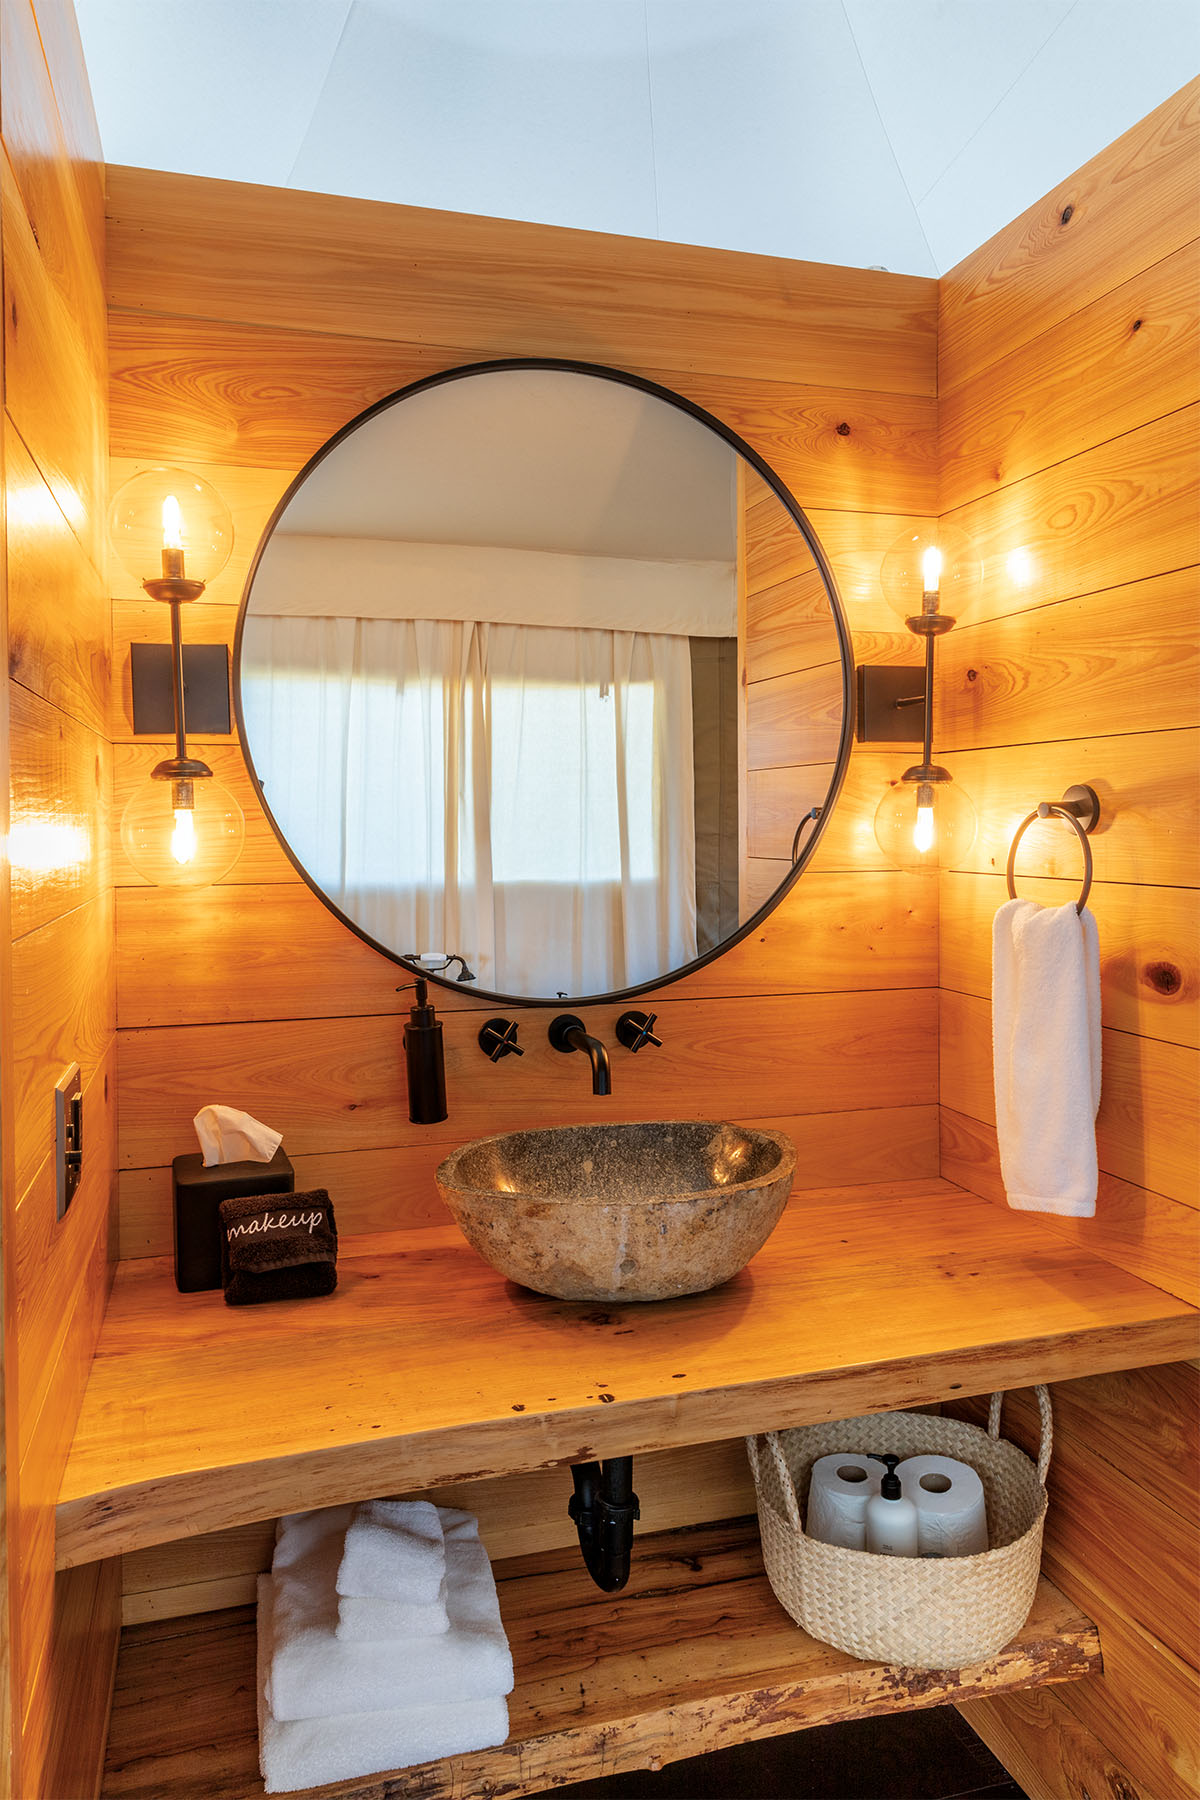 A circular mirror is illuminated by golden lights on a wood-paneled bathroom